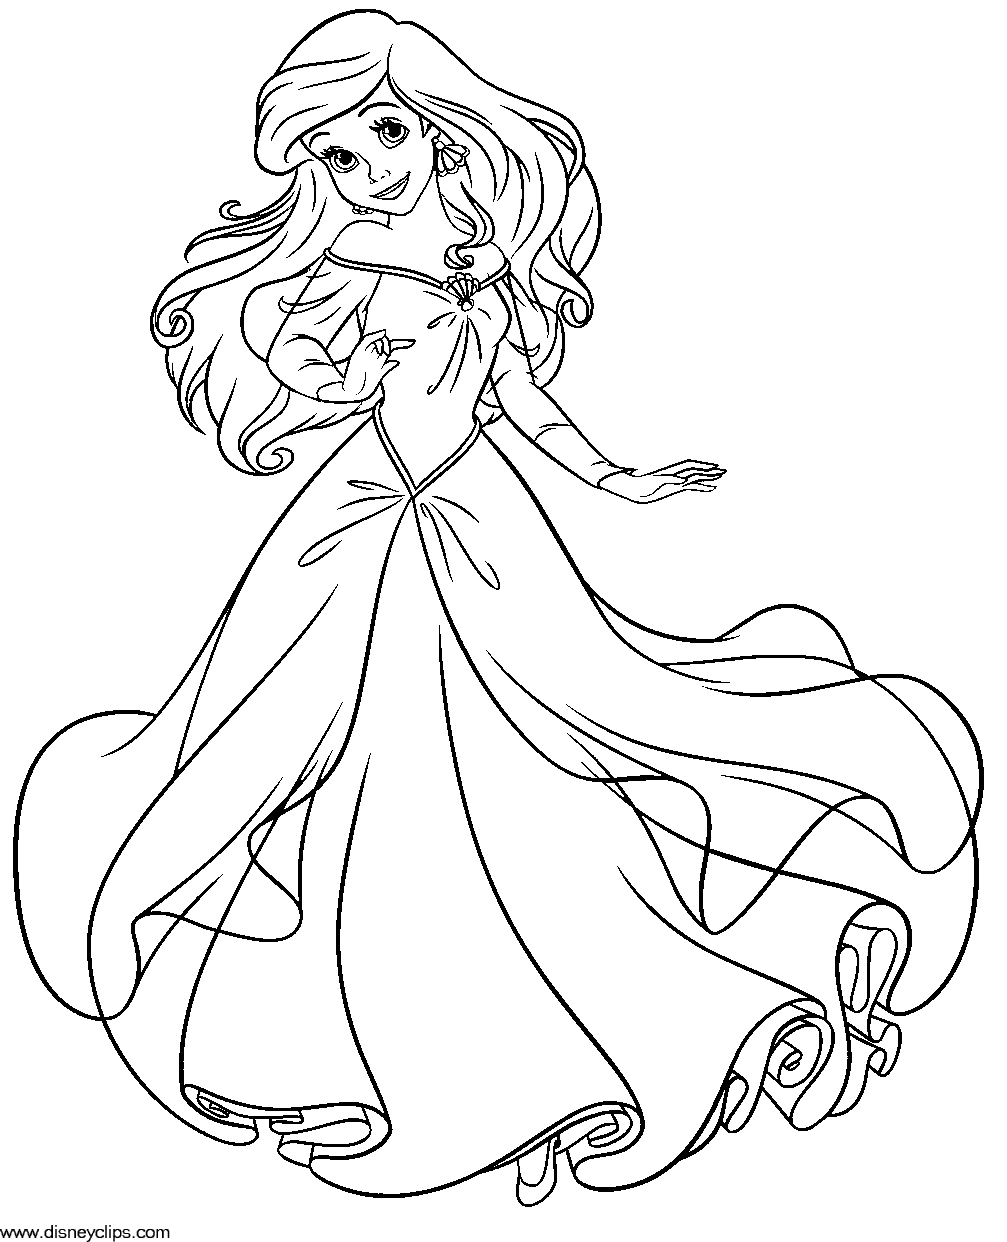 printable ariel coloring pages ariel coloring pages to download and print for free pages printable coloring ariel 